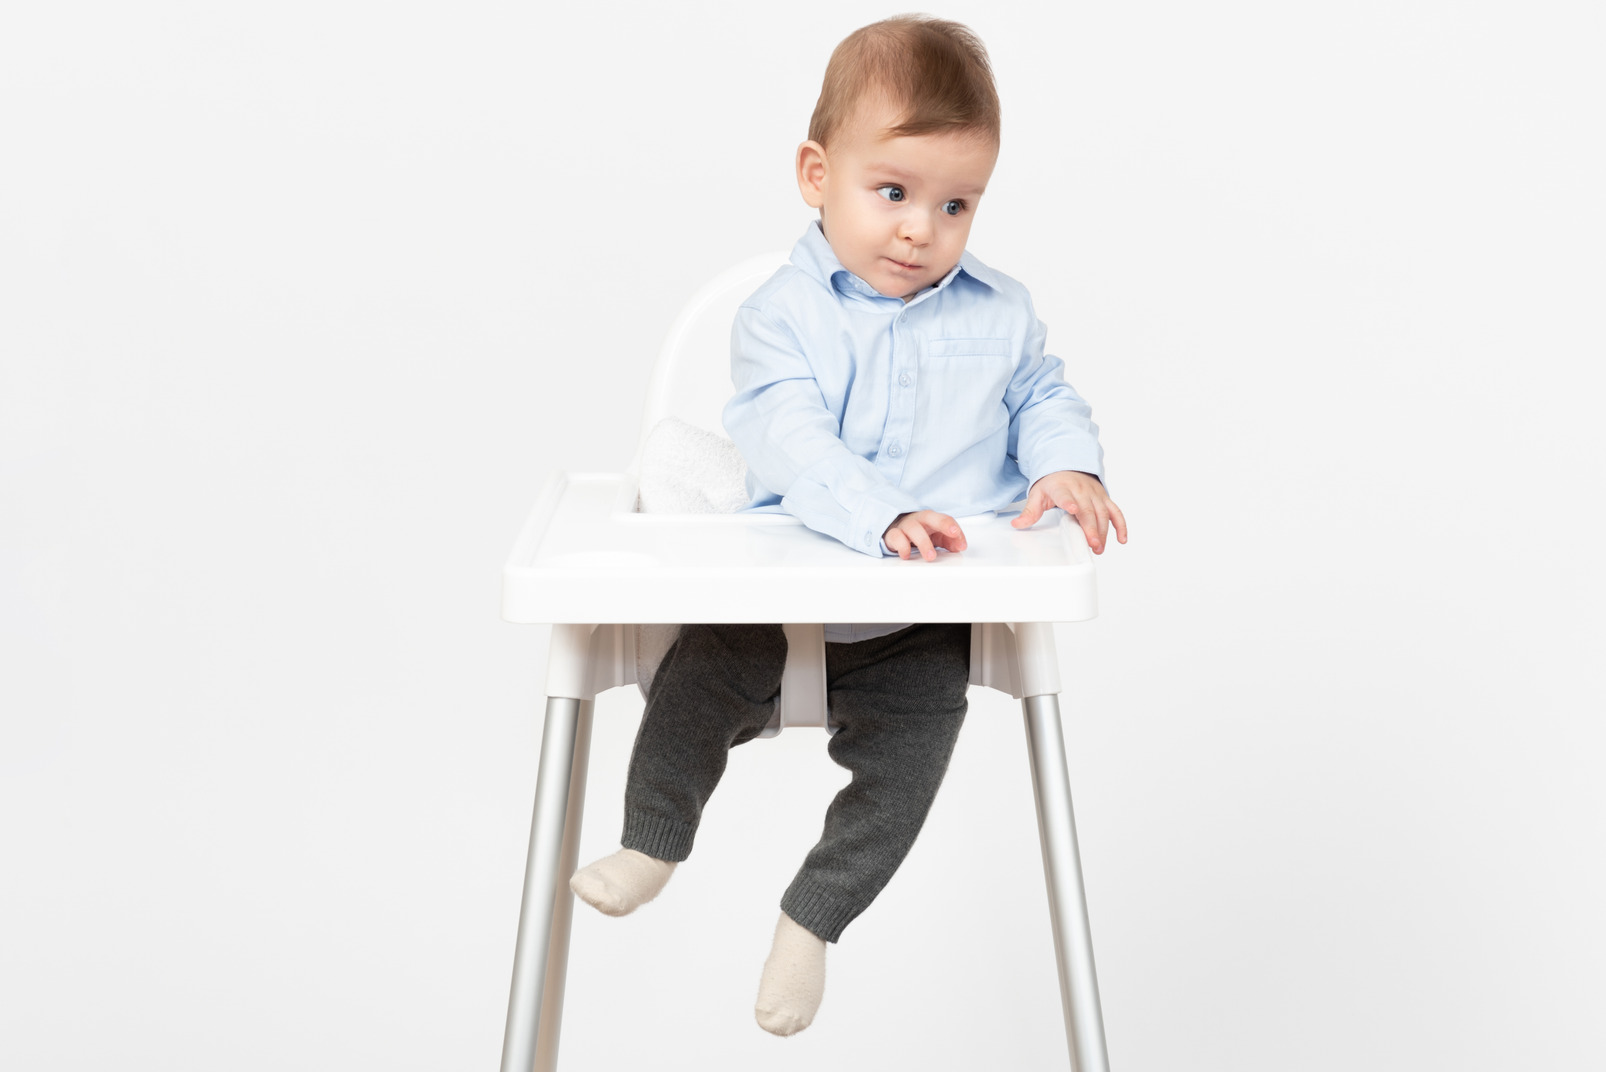 Adorable little baby boy sitting in highchair